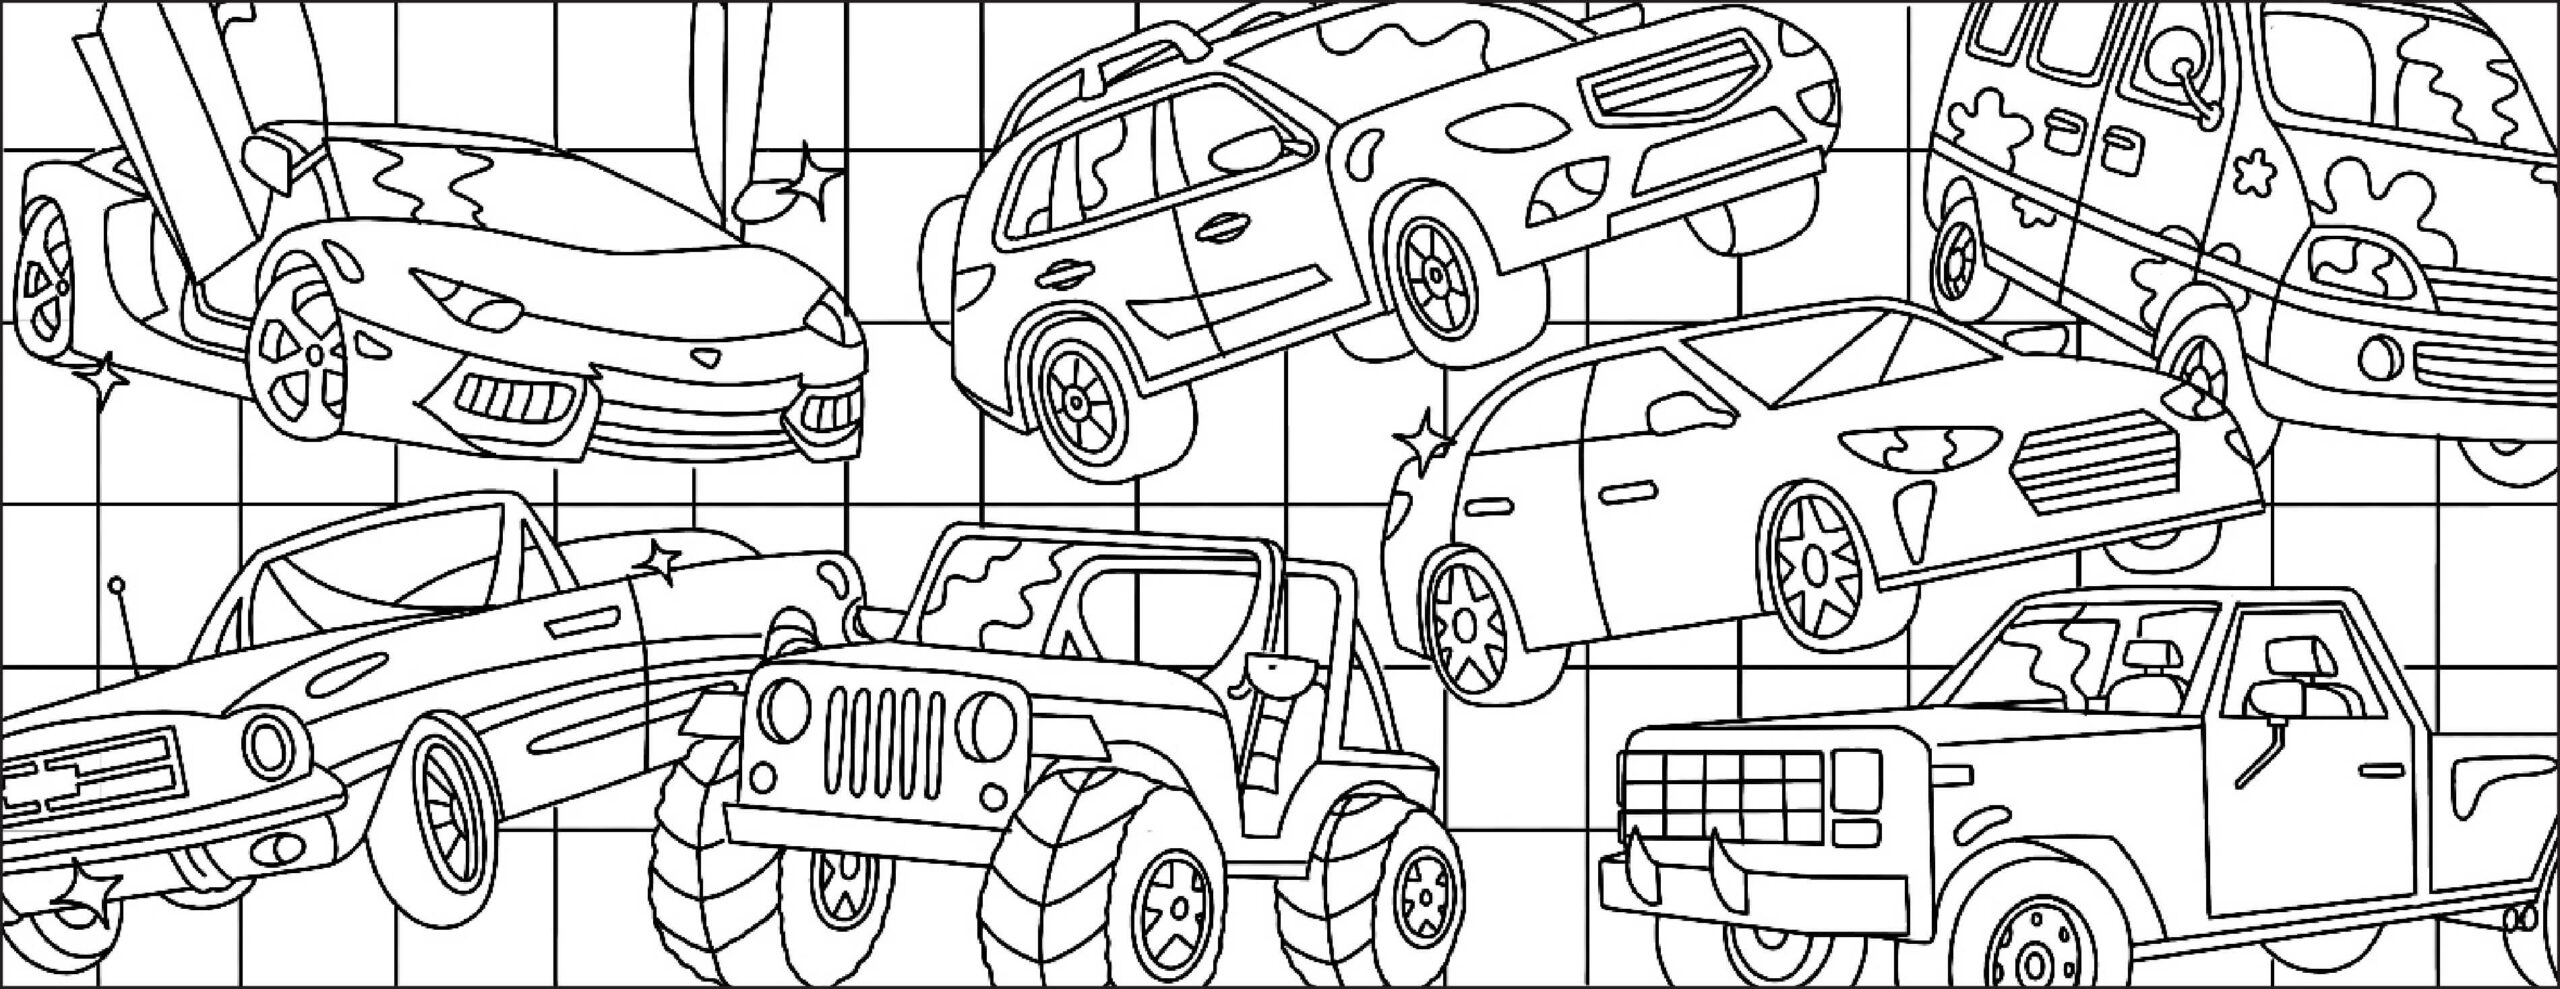 cars-sketches-15